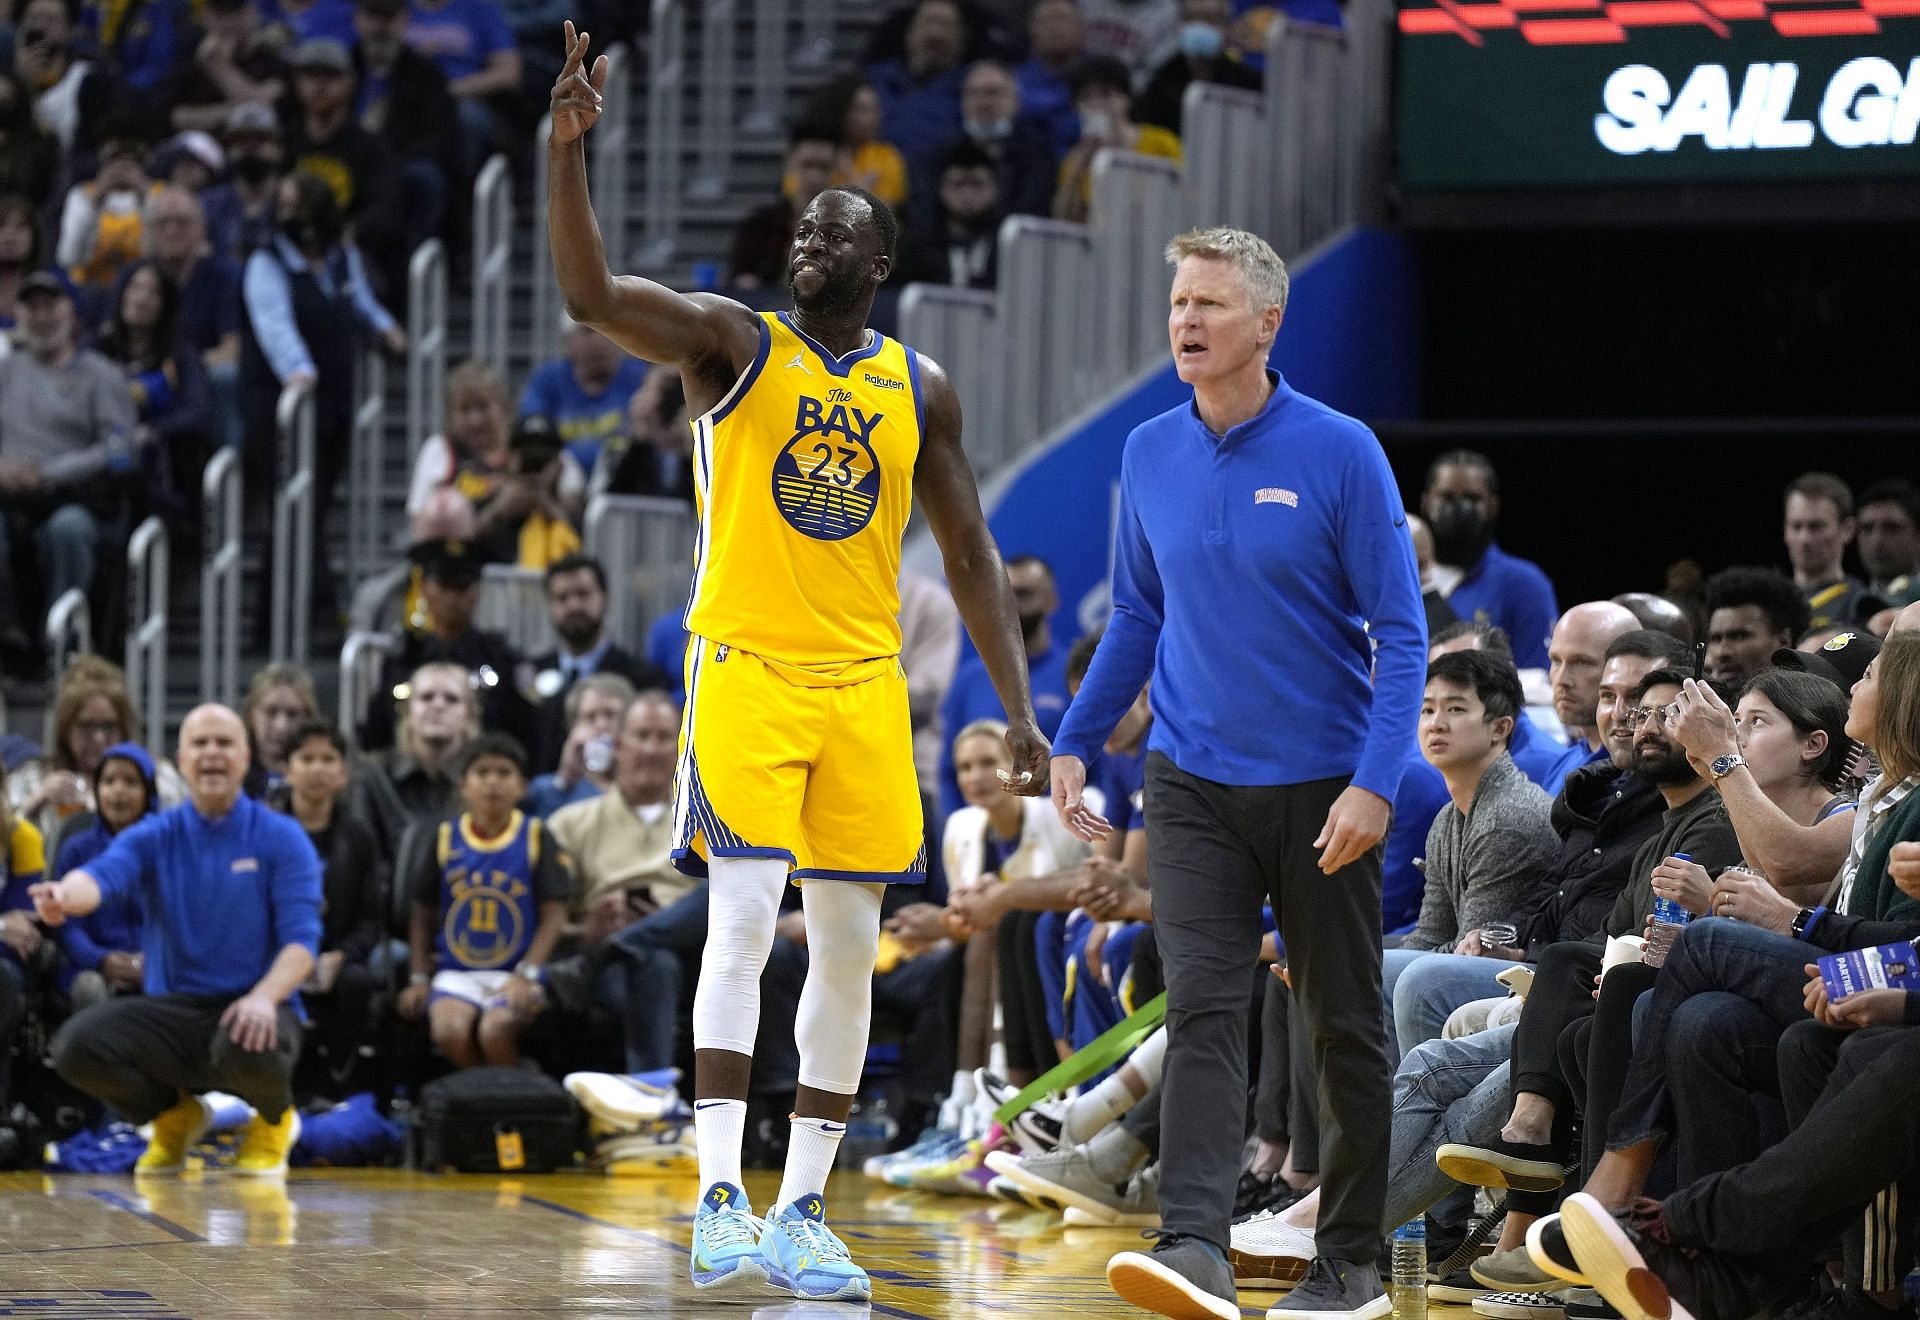 Draymond Green will be looking to bring the Golden State Warriors back to winning ways